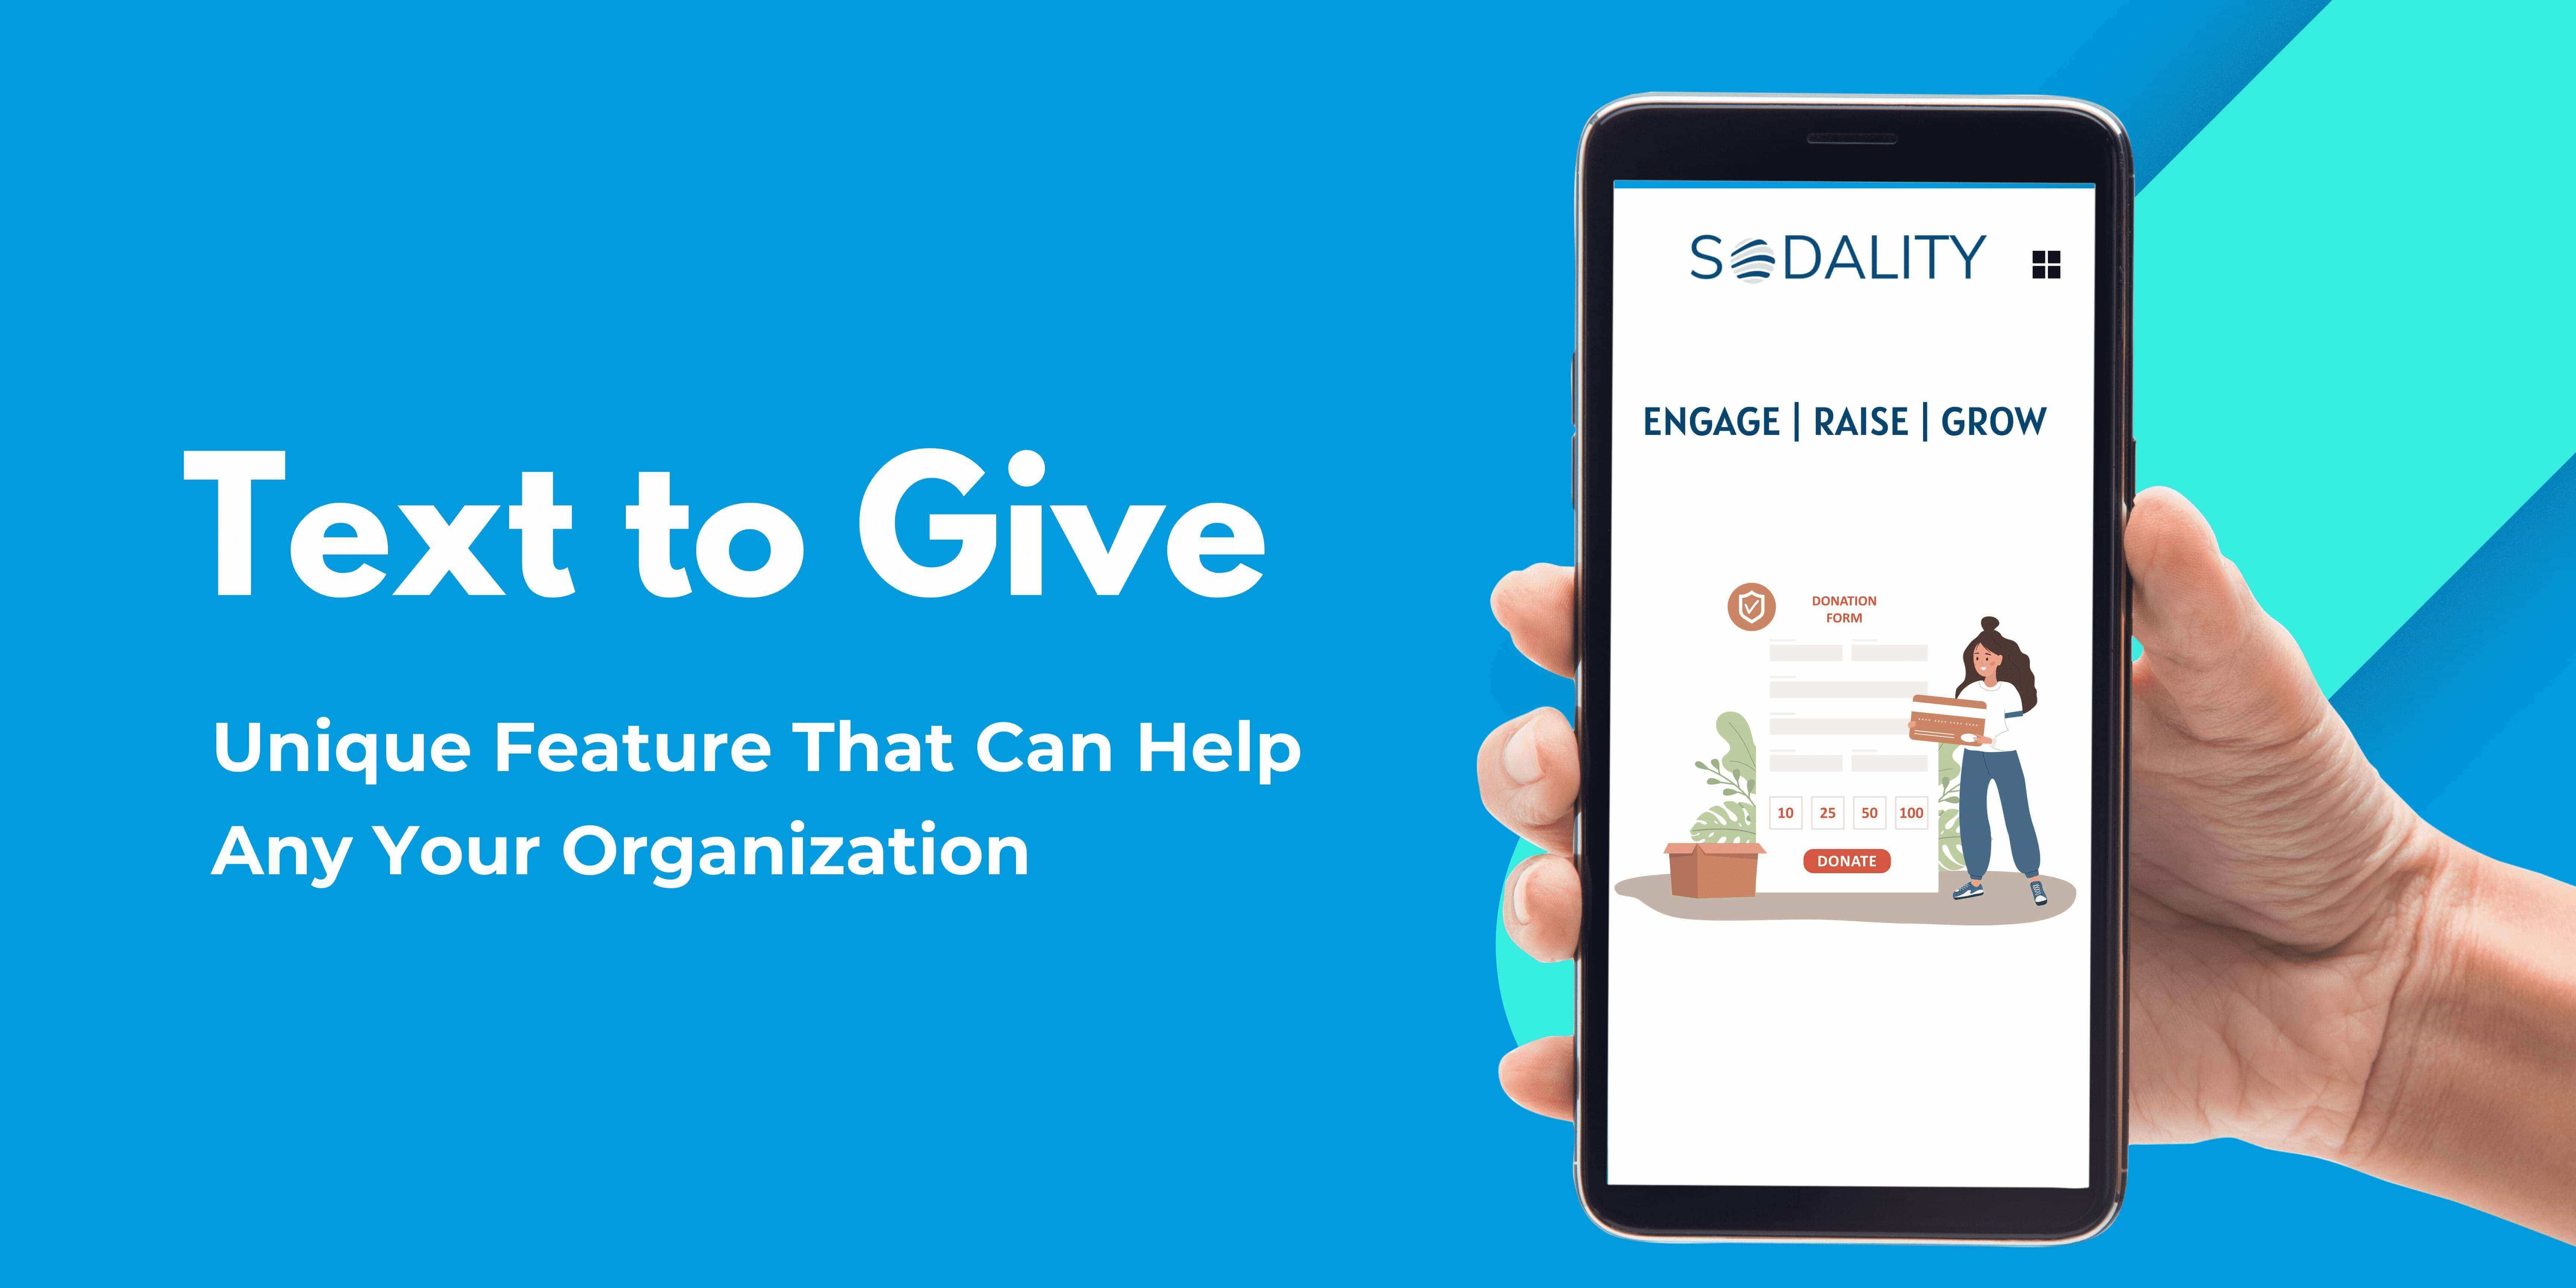 SMS/Text Donations